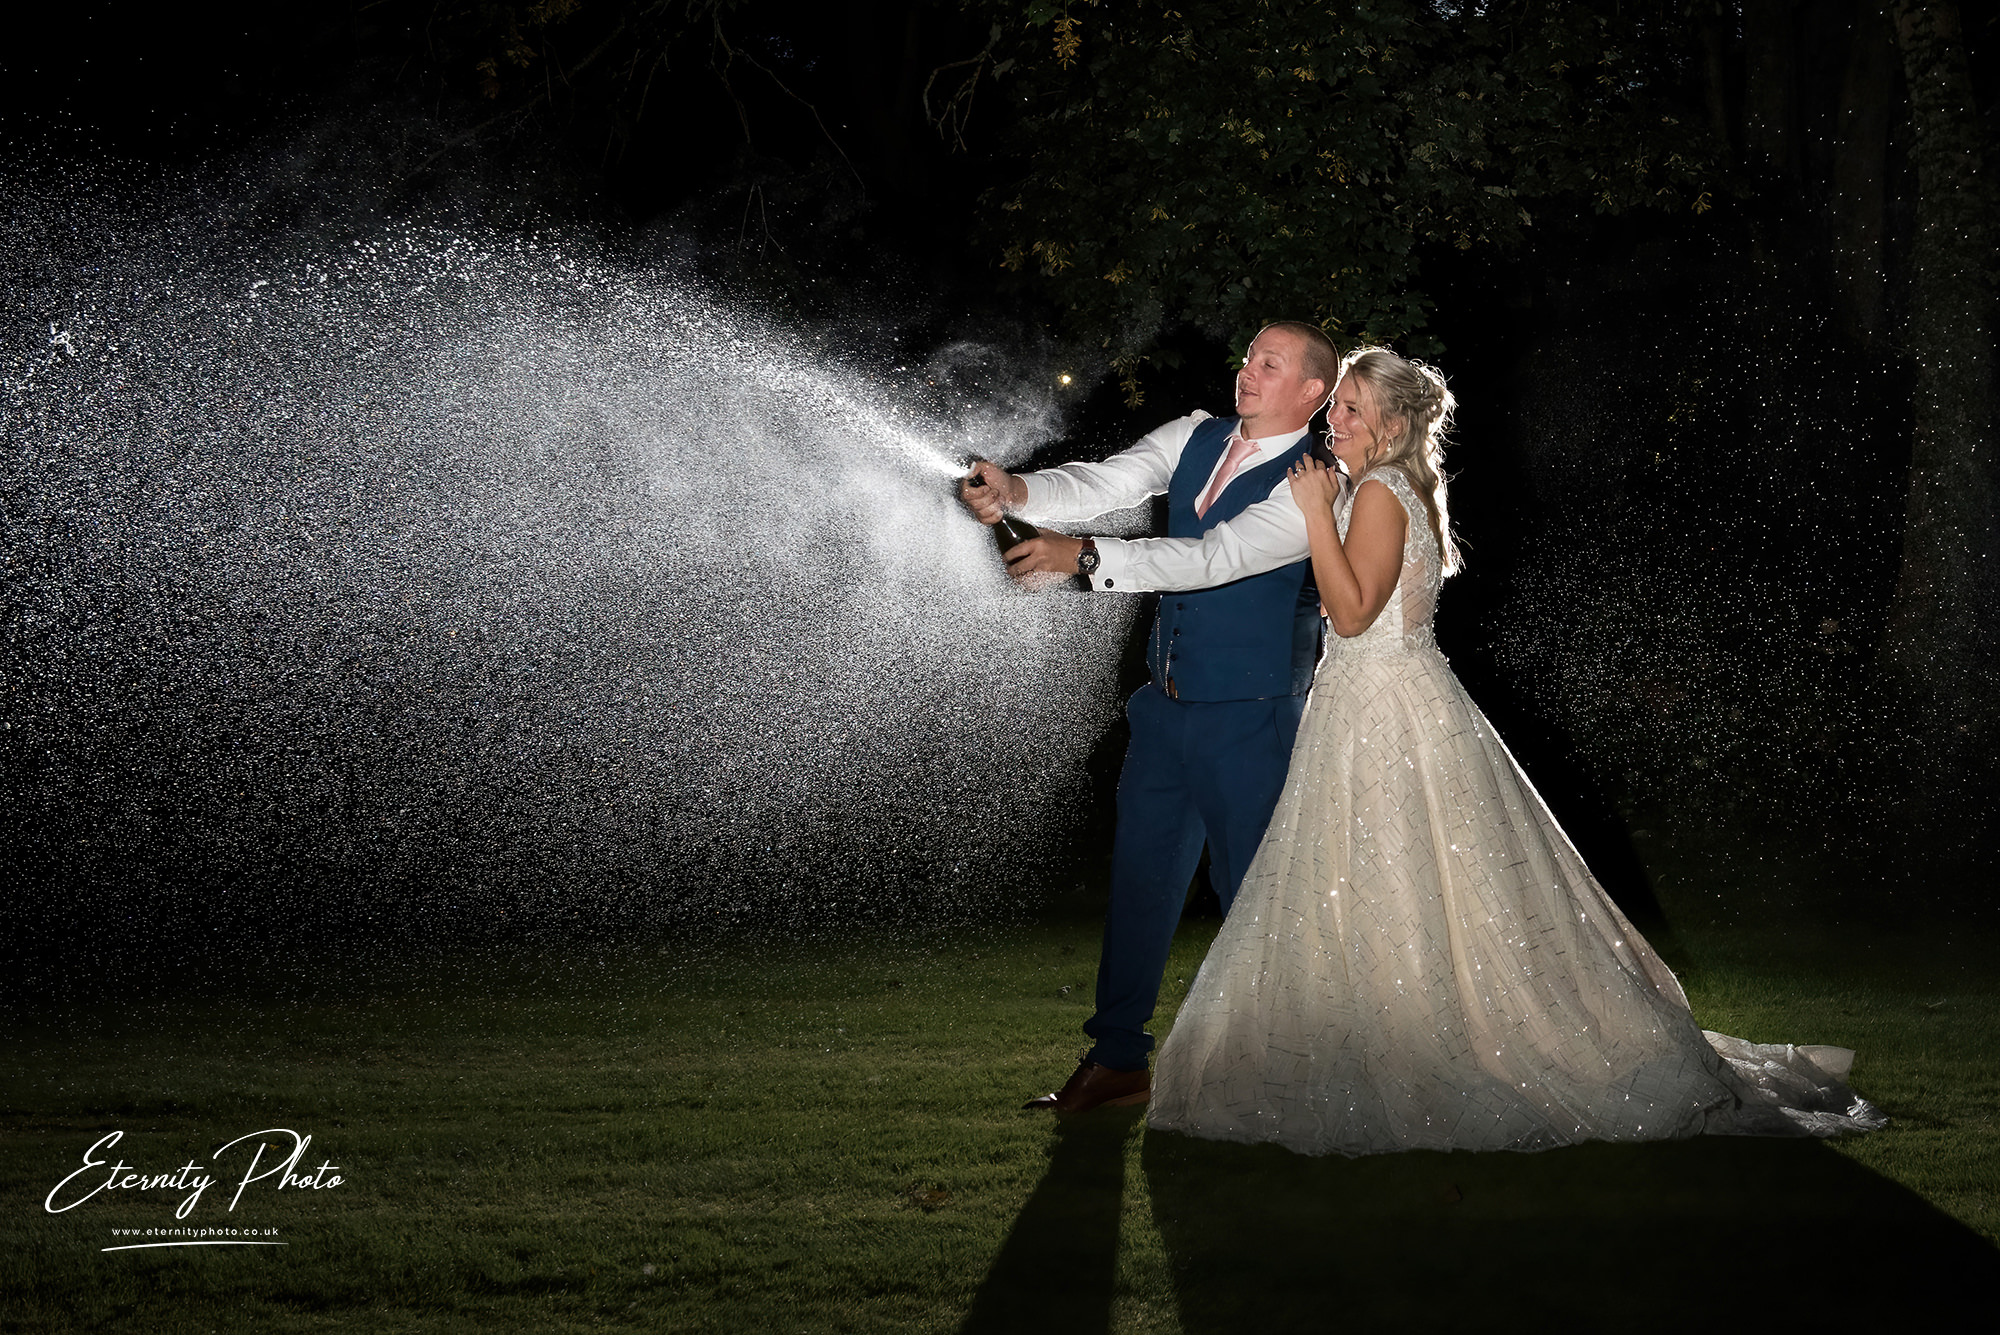 Bride and groom popping champagne at night wedding